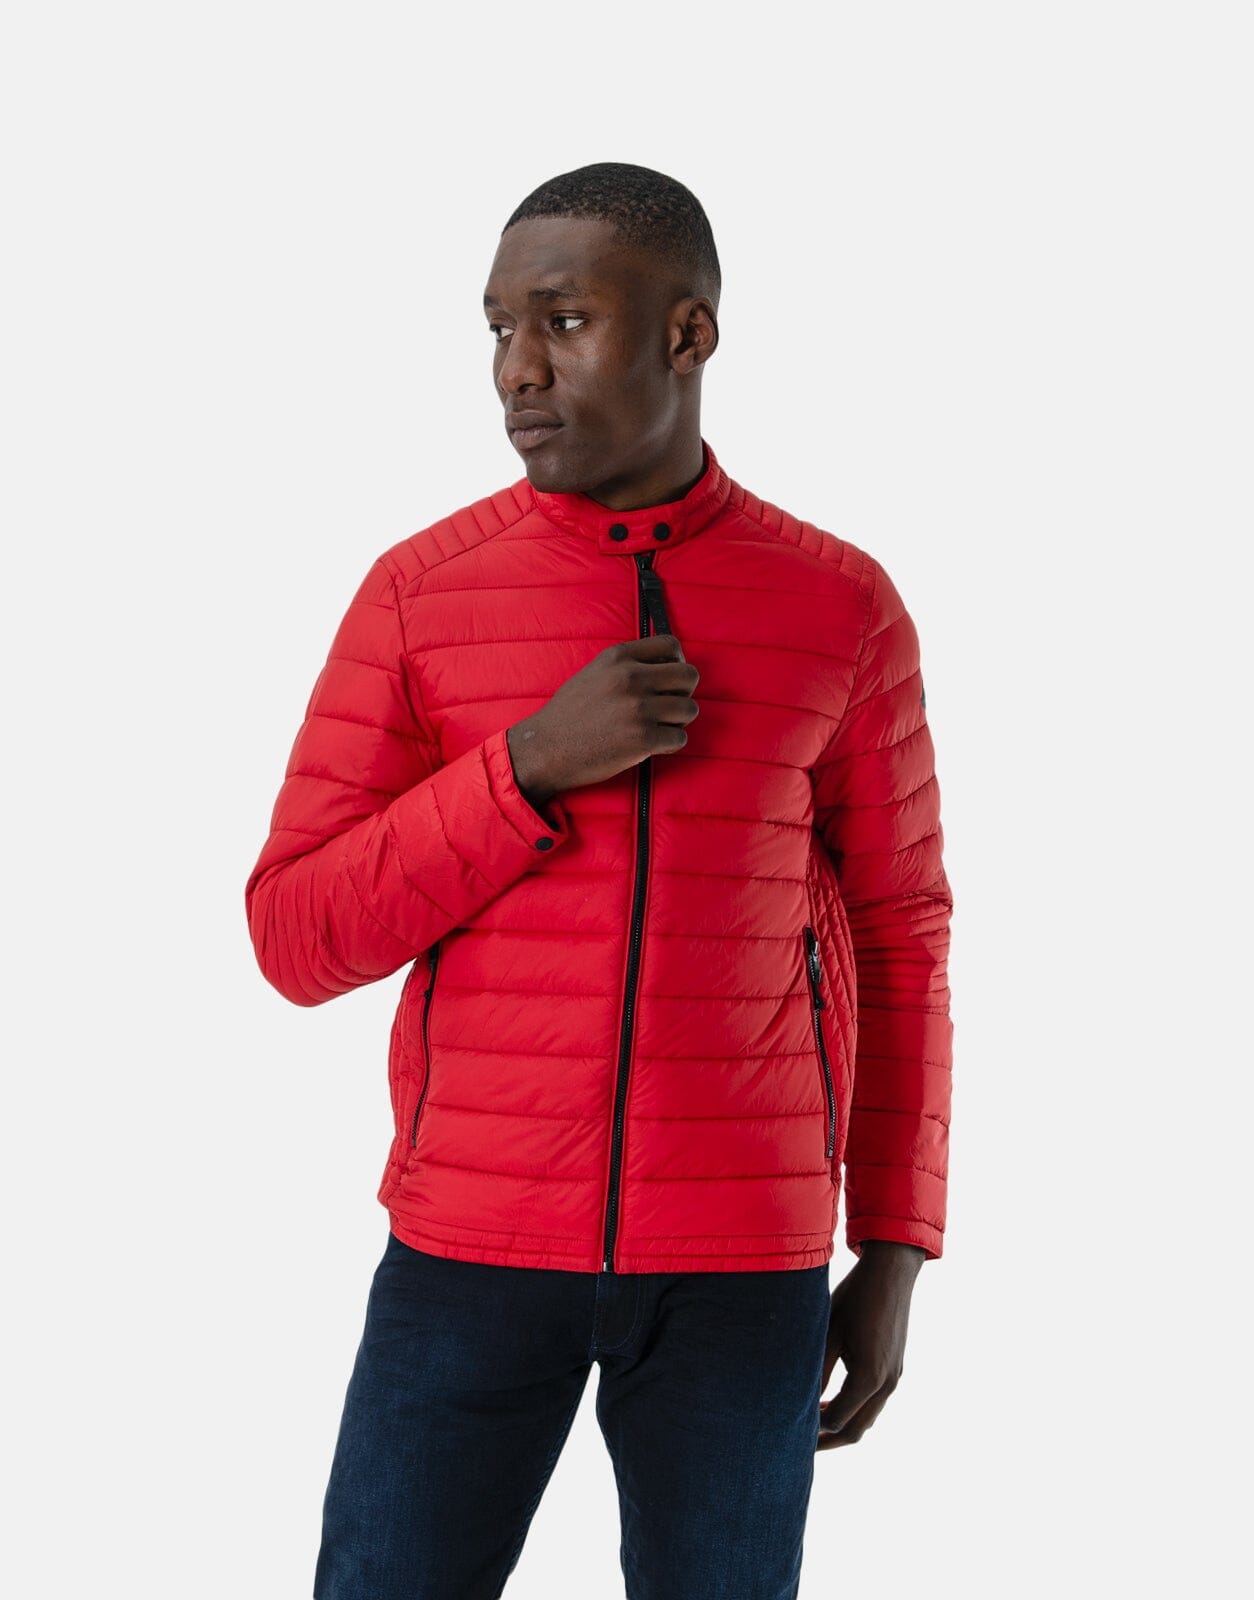 Replay Slim Fit Recycled Nylon Red Jacket - Subwear